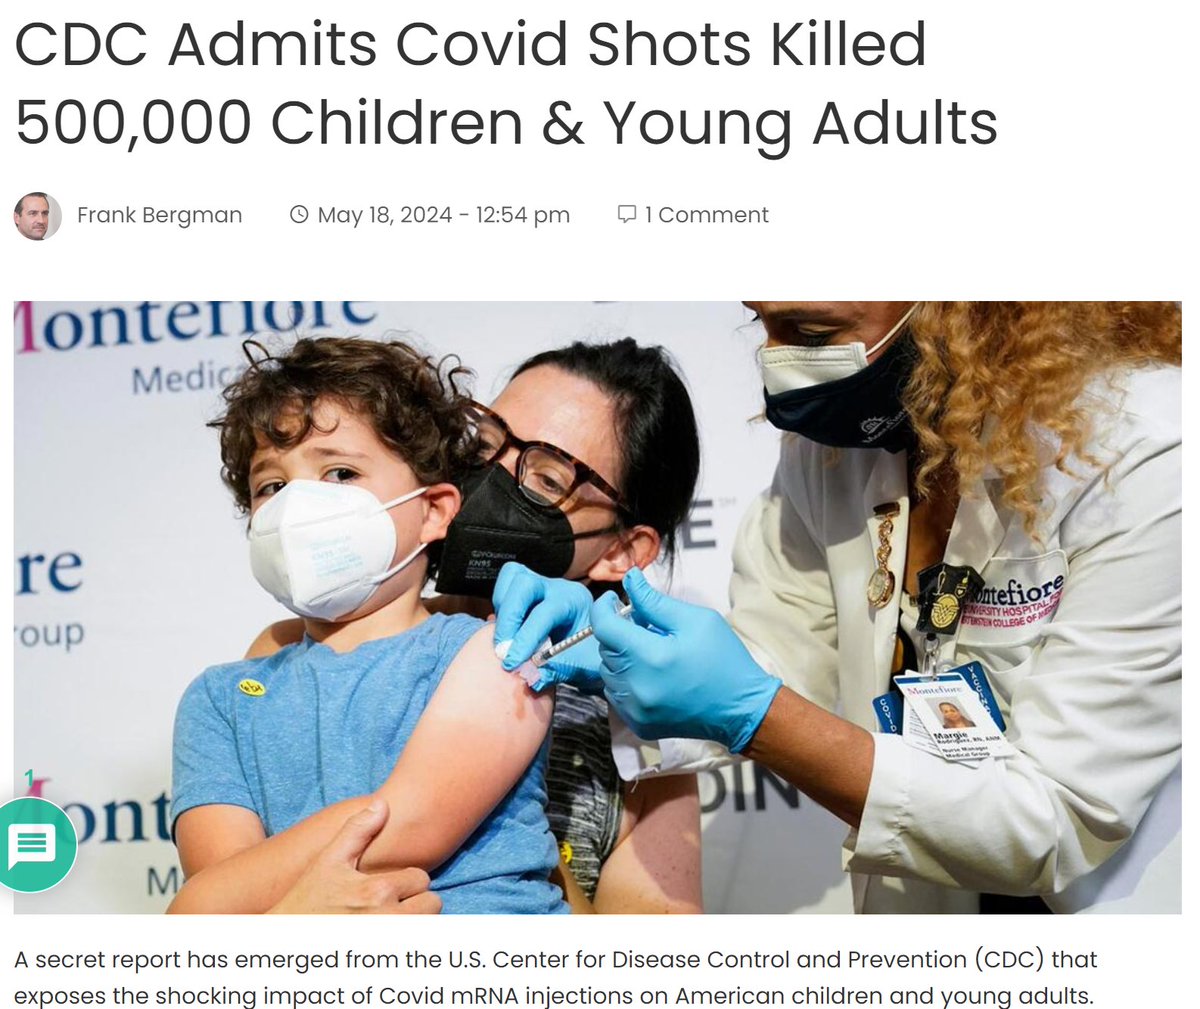 A secret report has emerged from the U.S. Center for Disease Control and Prevention (CDC) that exposes the shocking impact of Covid mRNA injections on American children and young adults. The bombshell report shows that a staggering half a million American children and young